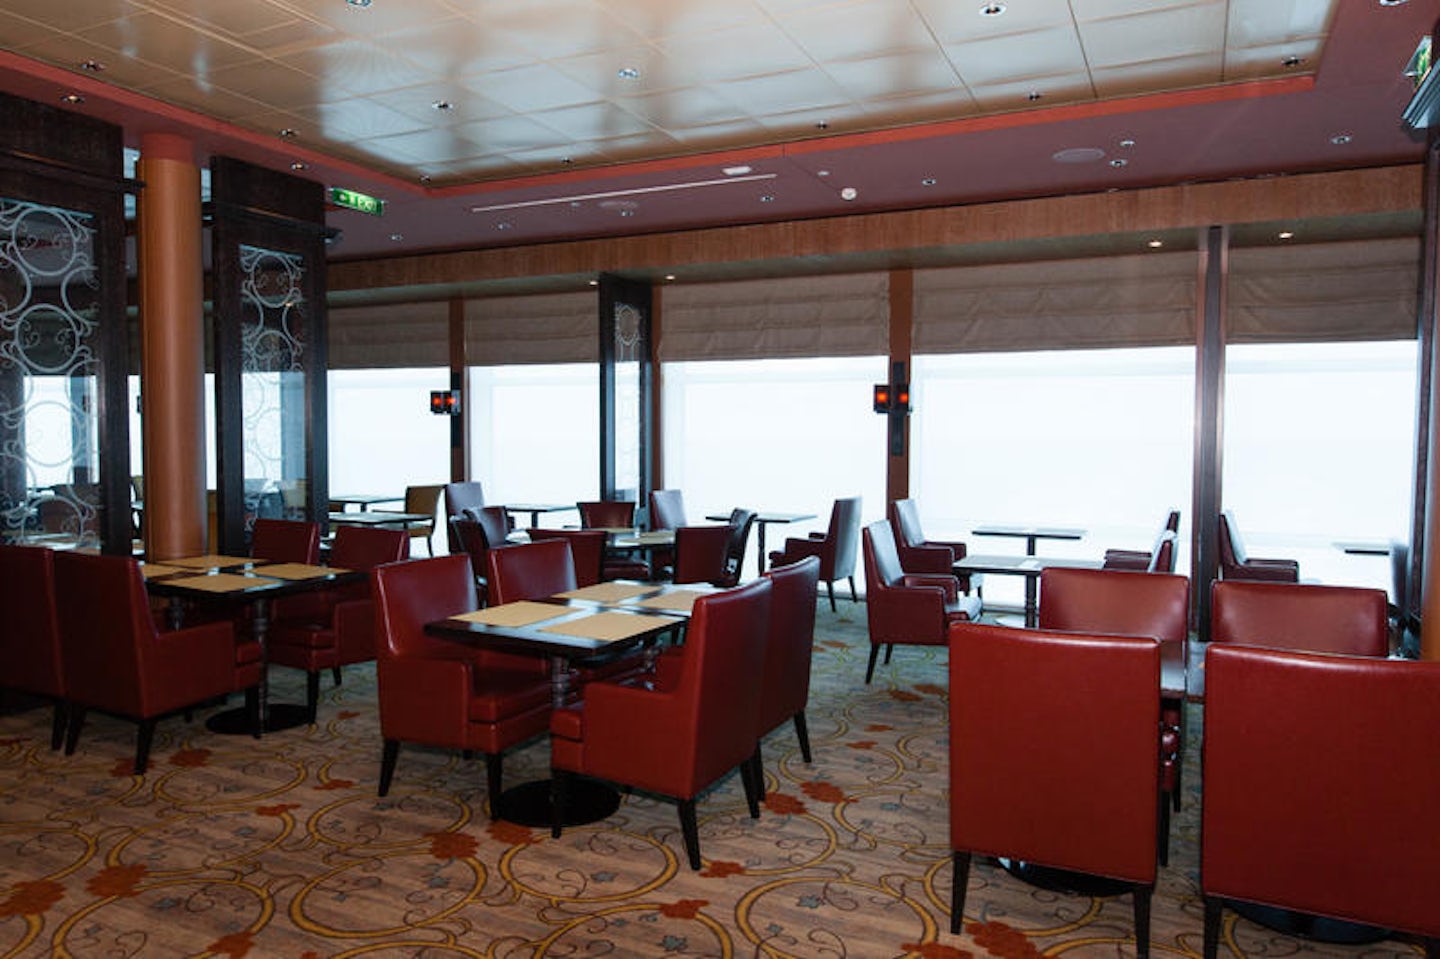 Tuscan Grille on Celebrity Silhouette